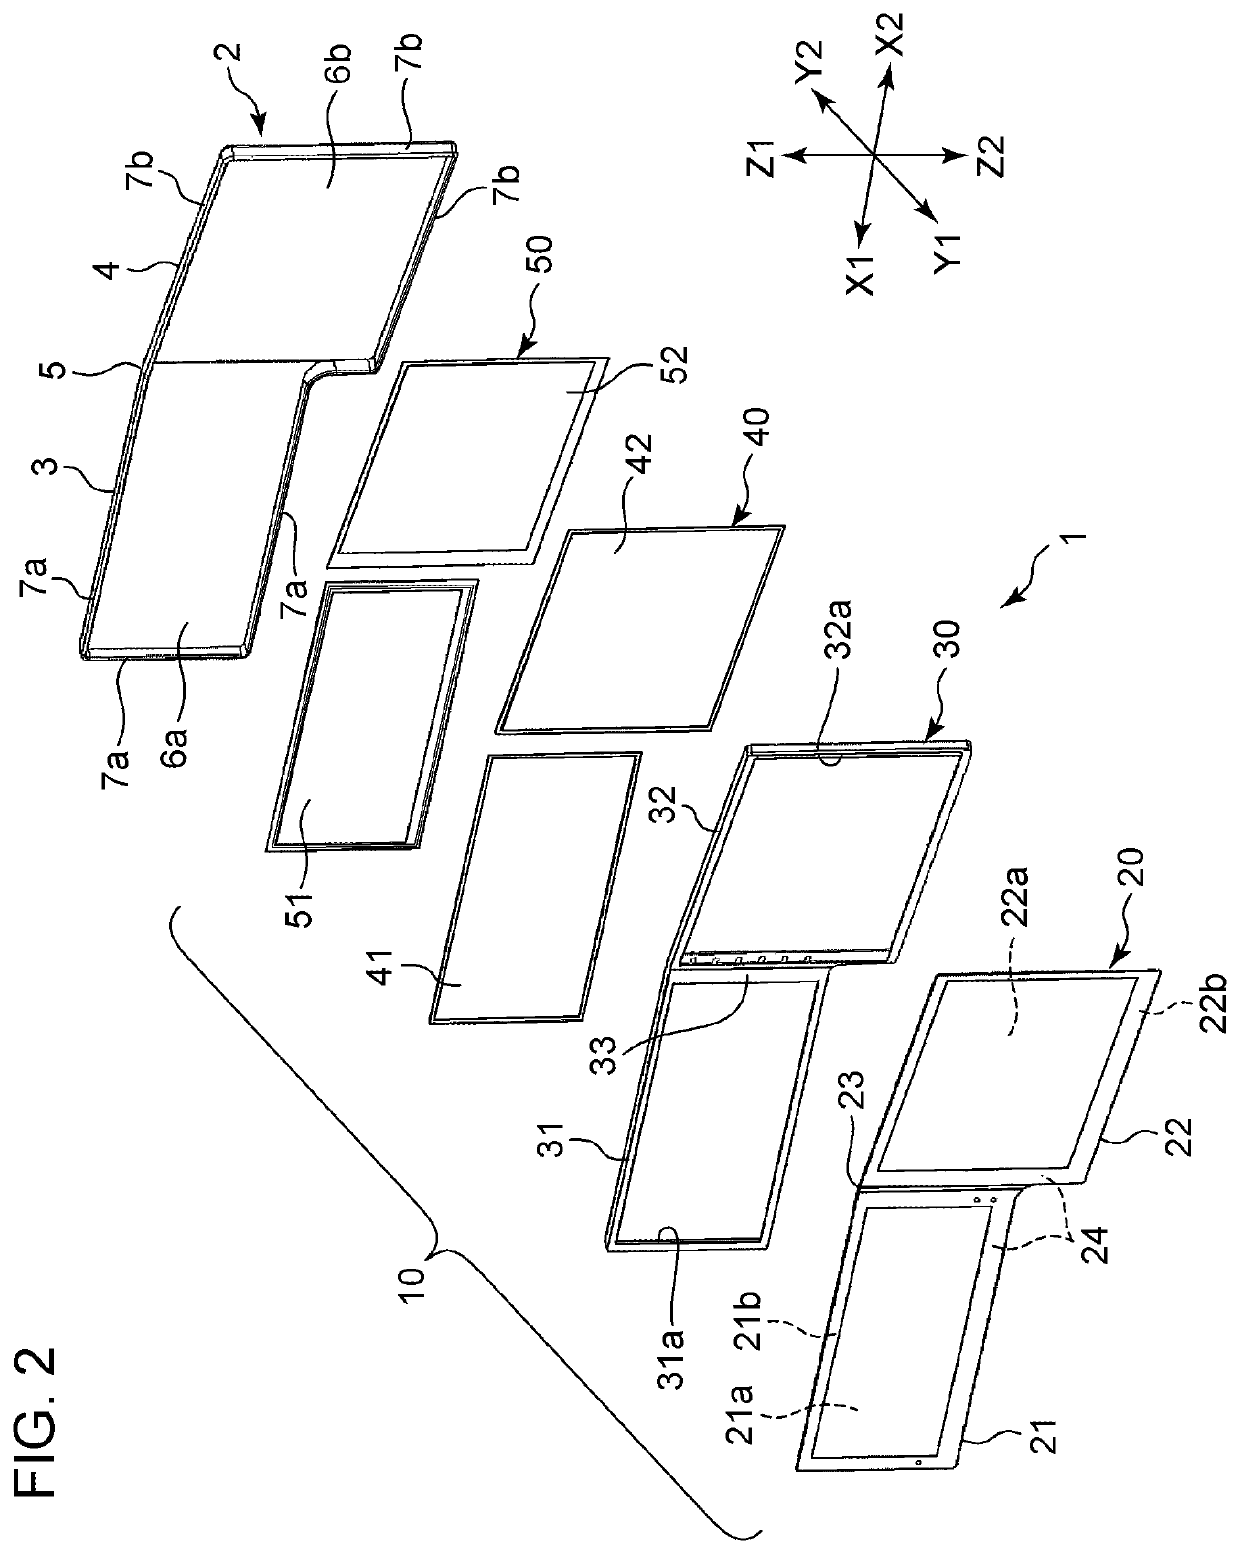 Display apparatus and method for assembling the same